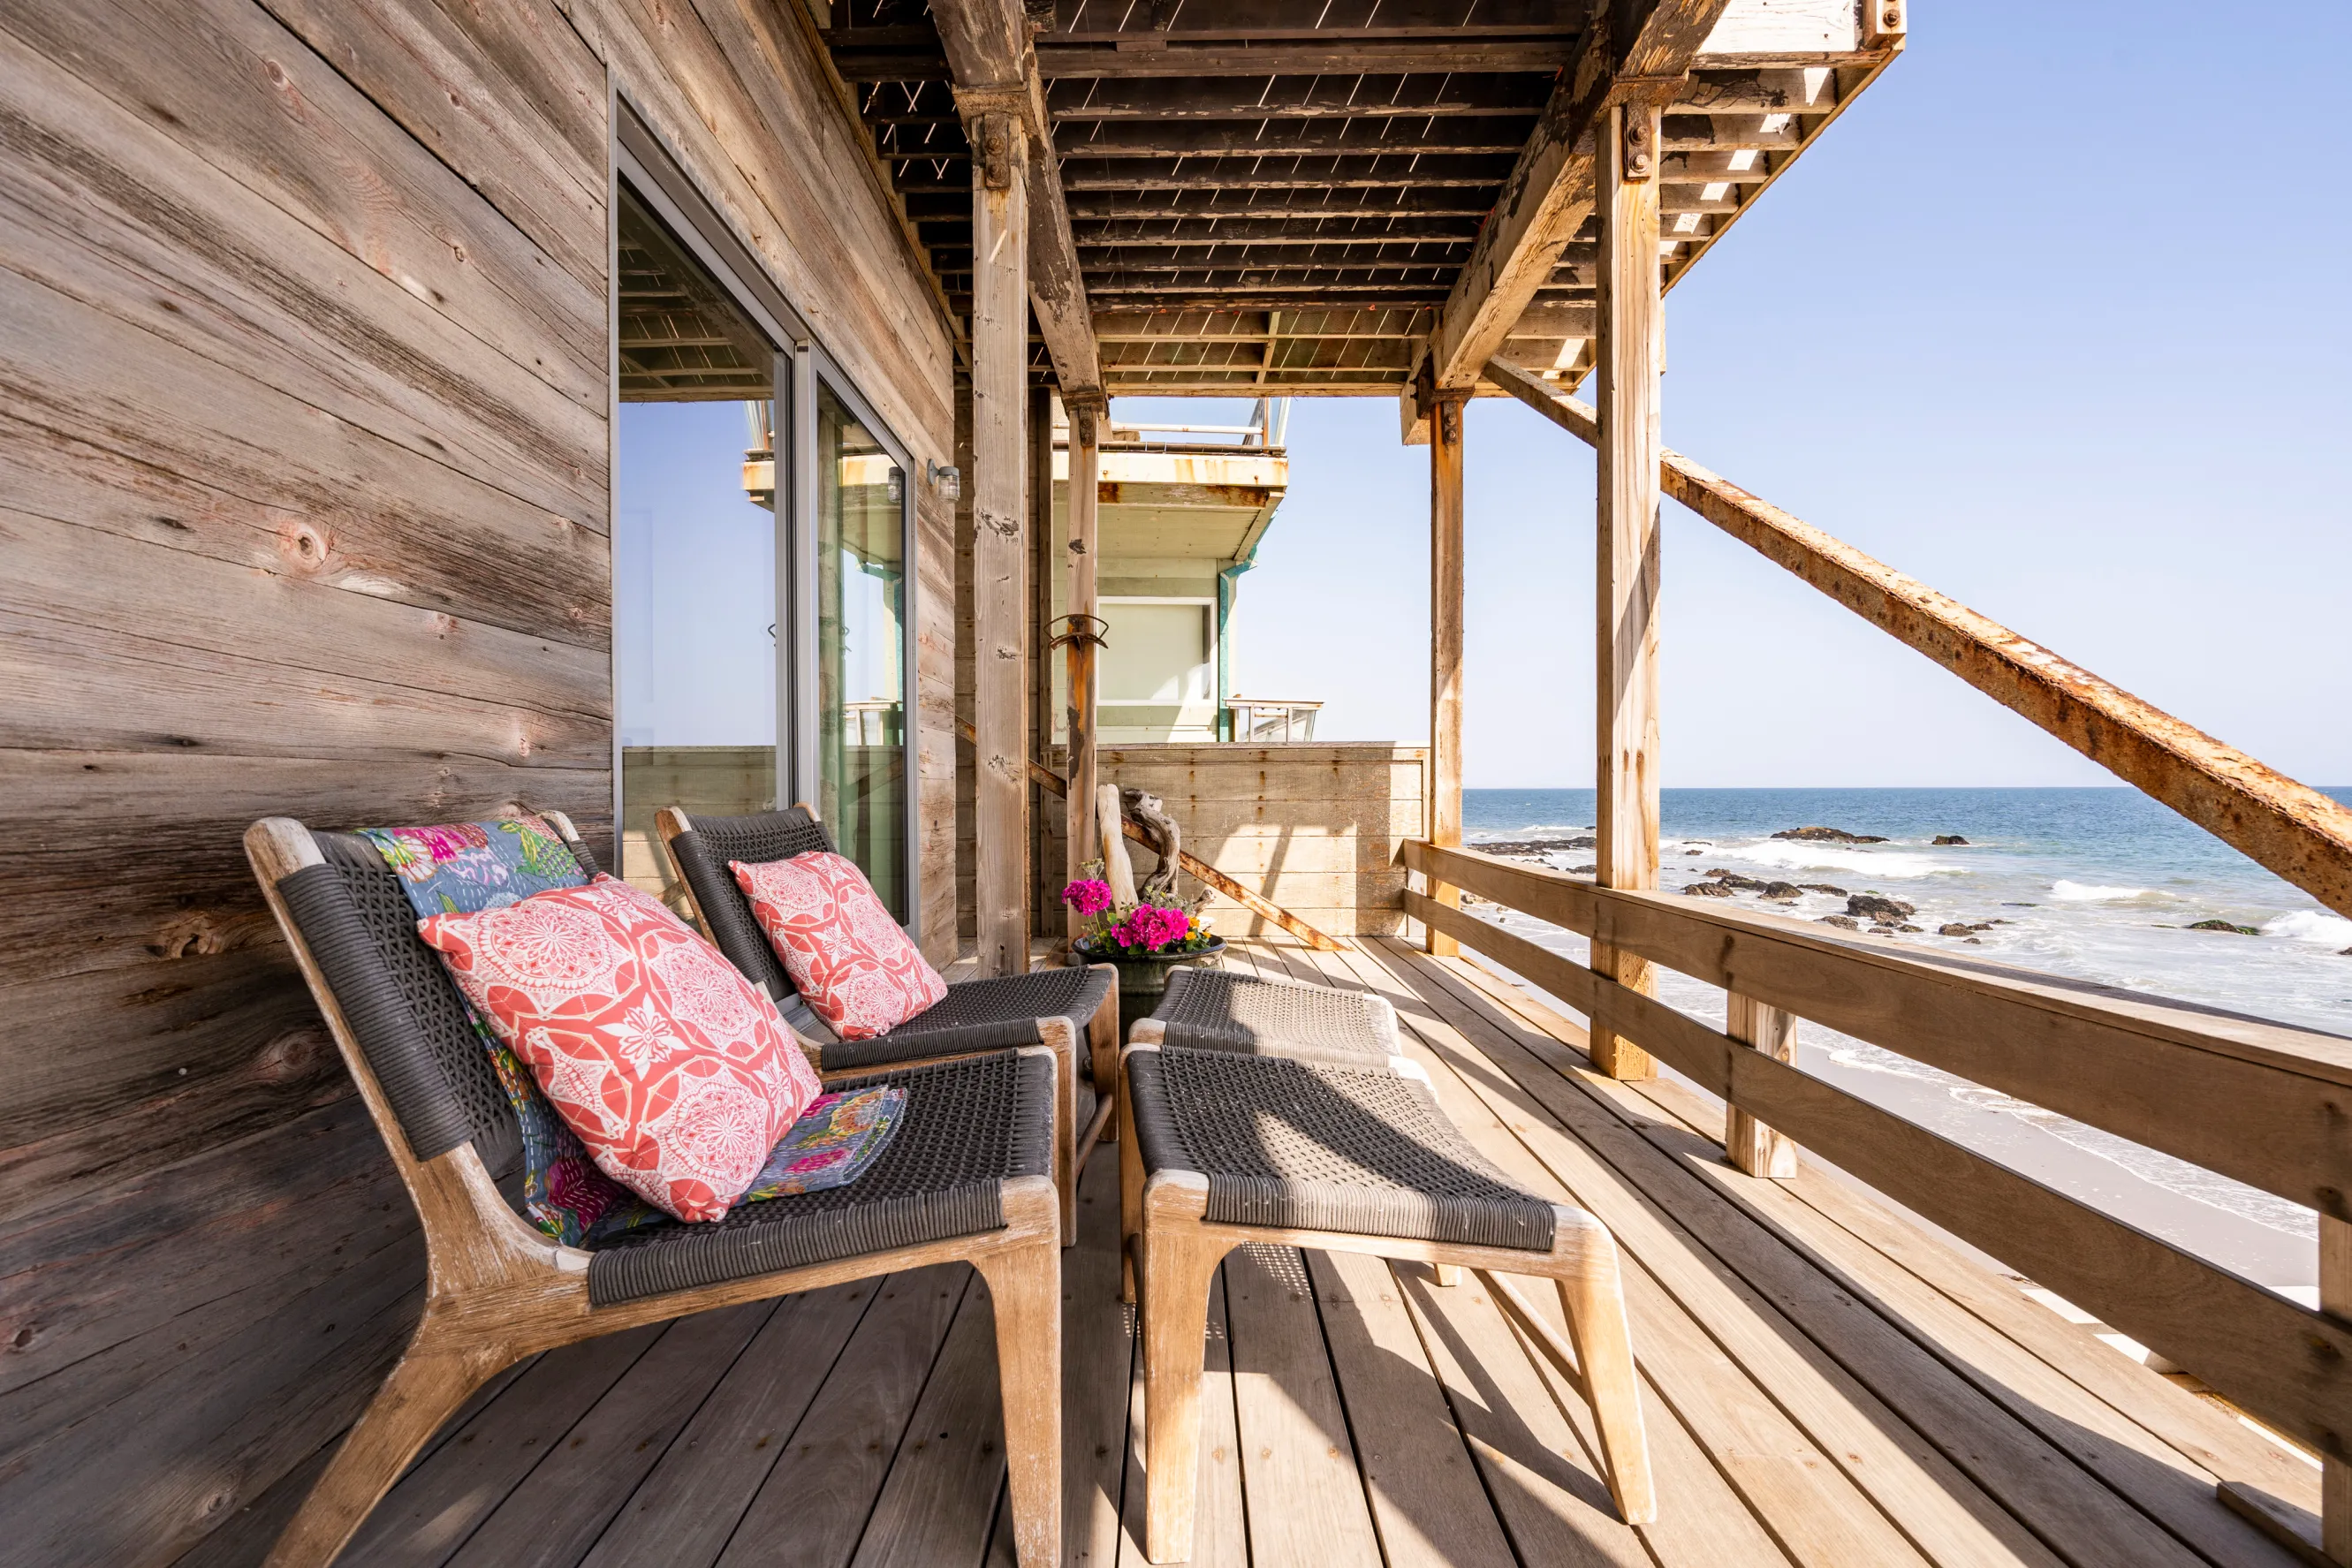 Wooden porch with two bench chairs perched in front of a railing looking over a sandy beach and the ocean